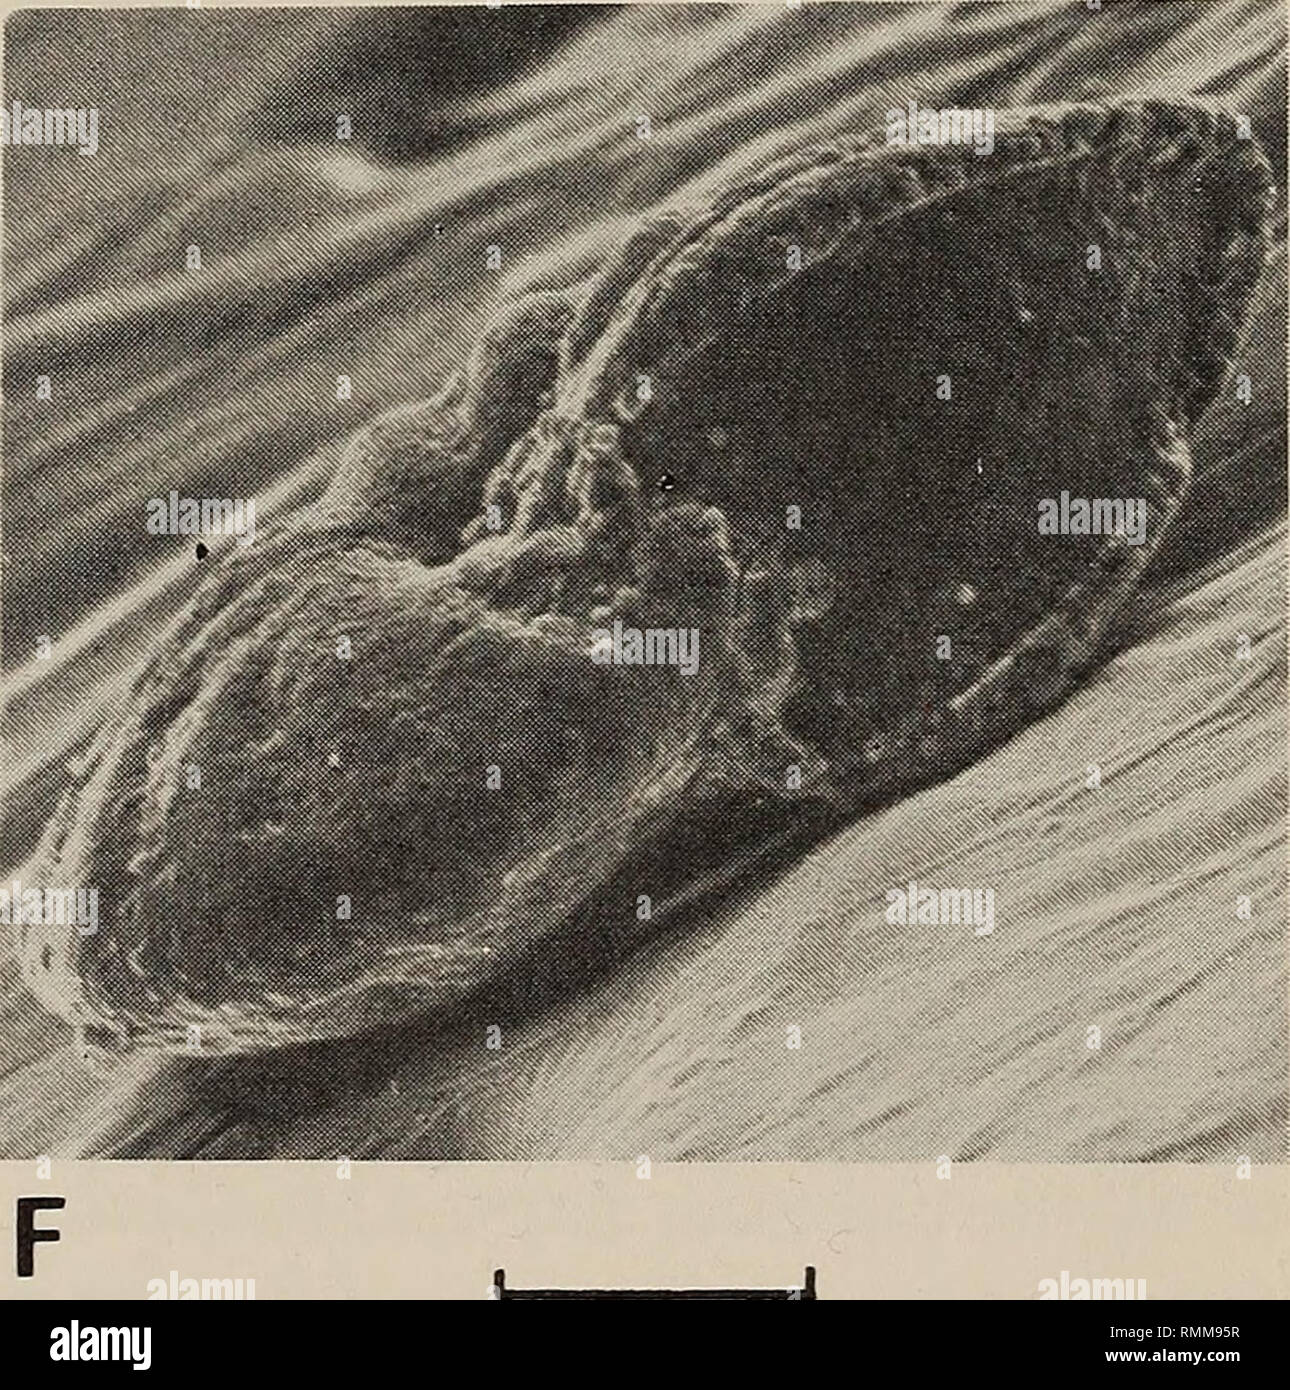 . Annals of the South African Museum = Annale van die Suid-Afrikaanse Museum. Natural history. Fig. 14. Benthic foraminifera from the upper Eocene at Wanderfeld IV (Fig. 7). Scanning electron micrographs. All scales = 100/x, unless otherwise stated. A. Elphidium sp. A, side view, SAM-K5529. B. Elphidium sp. A, peripheral view, SAM-K5529, scale = 30/x. C. Elphidium sp. B, side view, SAM-K5530. D. Elphidium sp. B, peripheral view, SAM-K5530. E. Nonion costiferum, side view, SAM-K5531. F. Nonion costiferum, peripheral view, SAM-K5532.. Please note that these images are extracted from scanned page Stock Photo